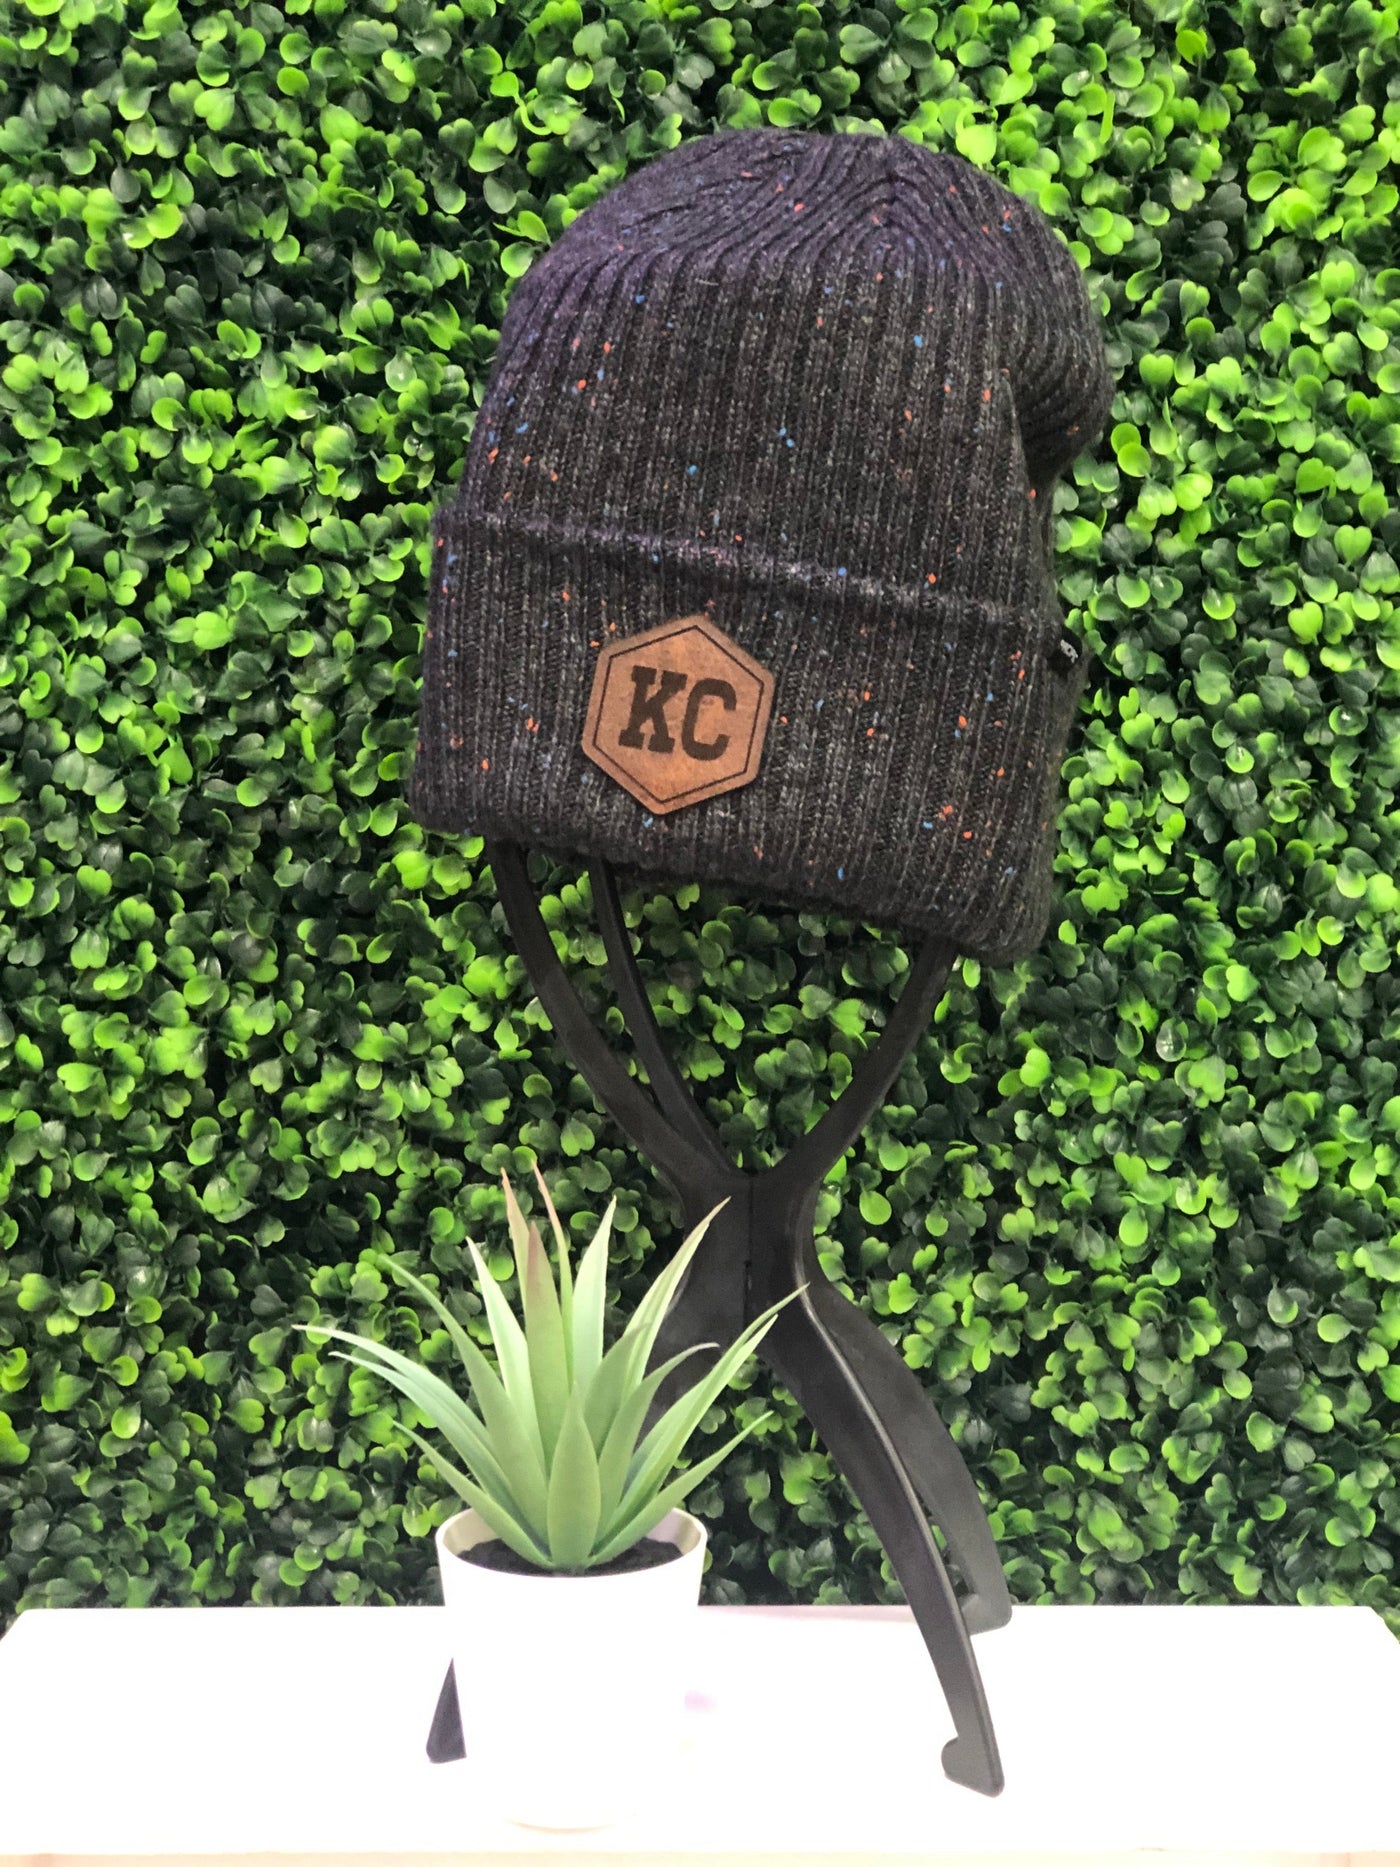 KC Leather Patch Tweed Beanies